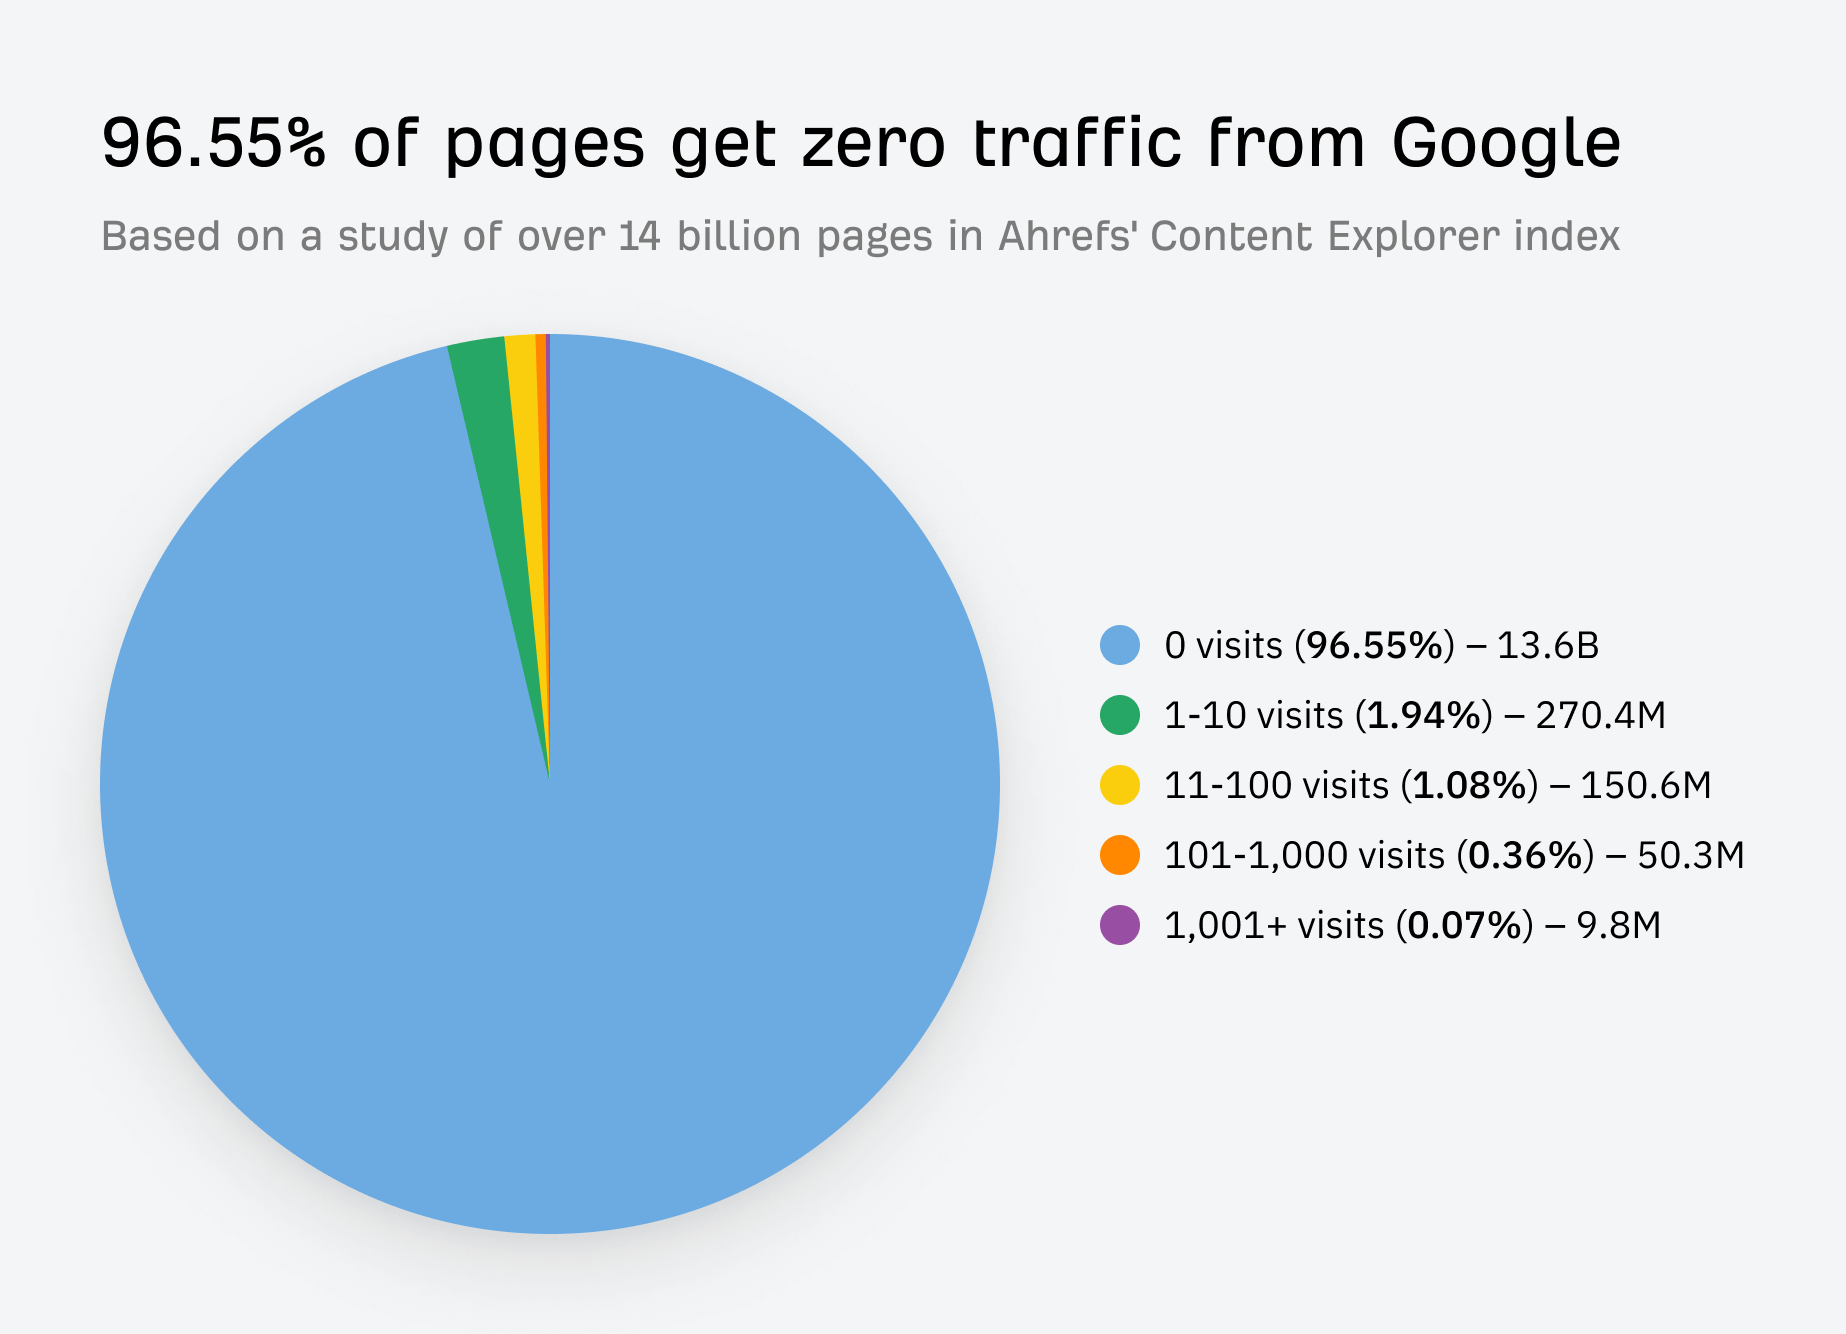 statistics, 96.55% percent of pages get zero traffic from Google